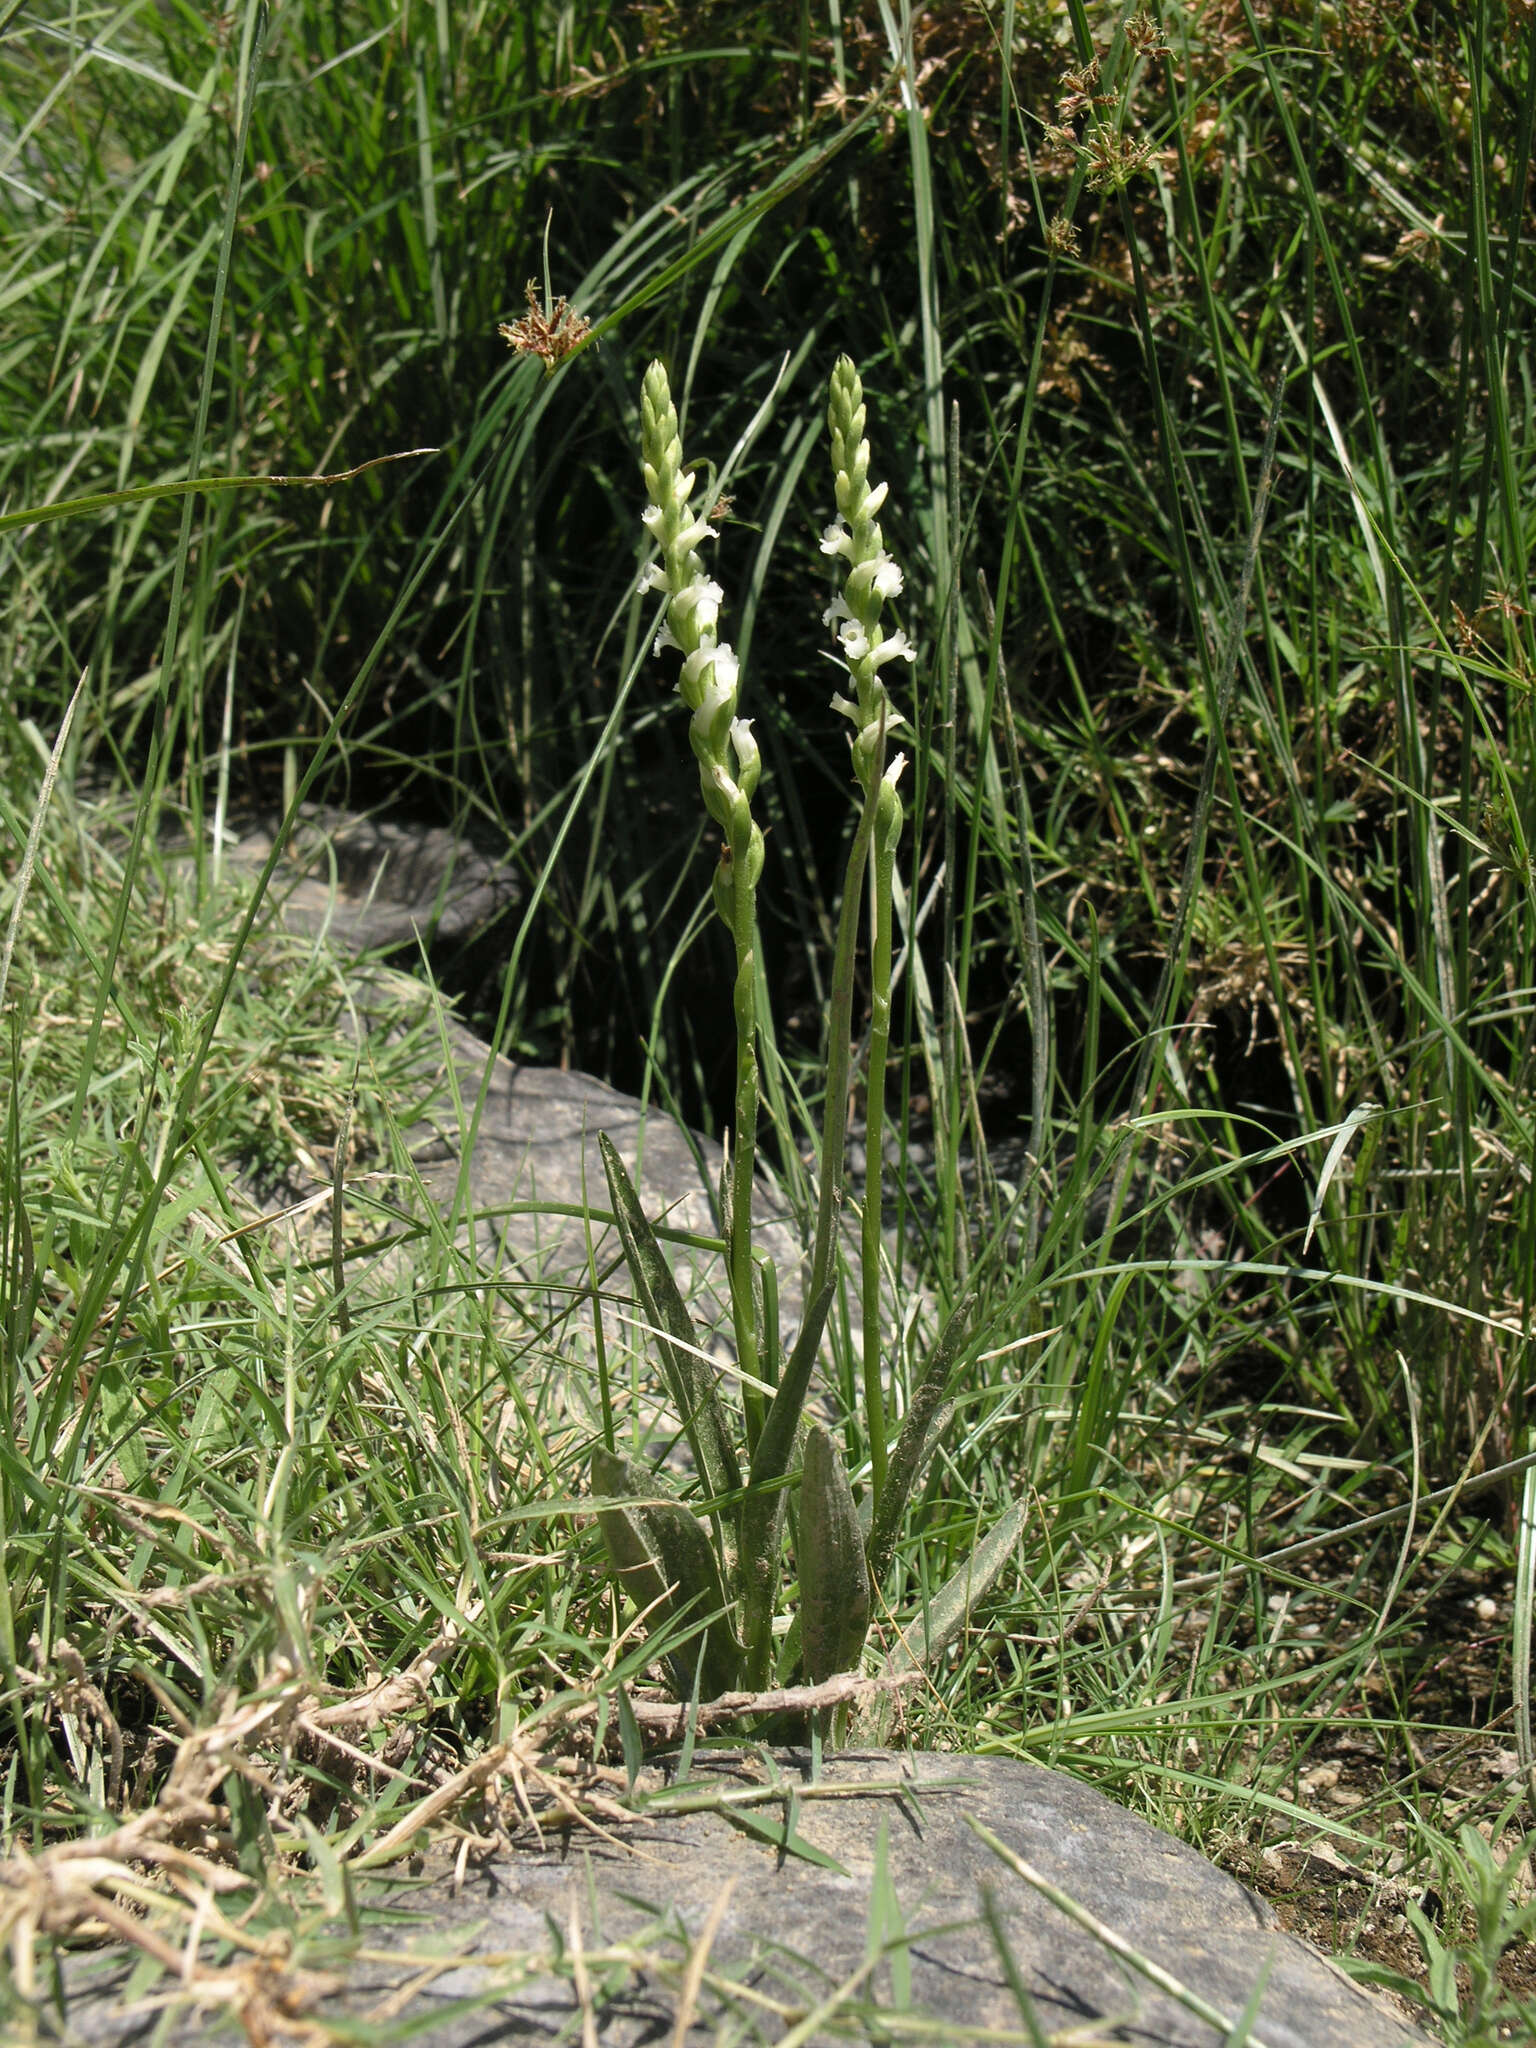 Image of Summer lady's-tresses